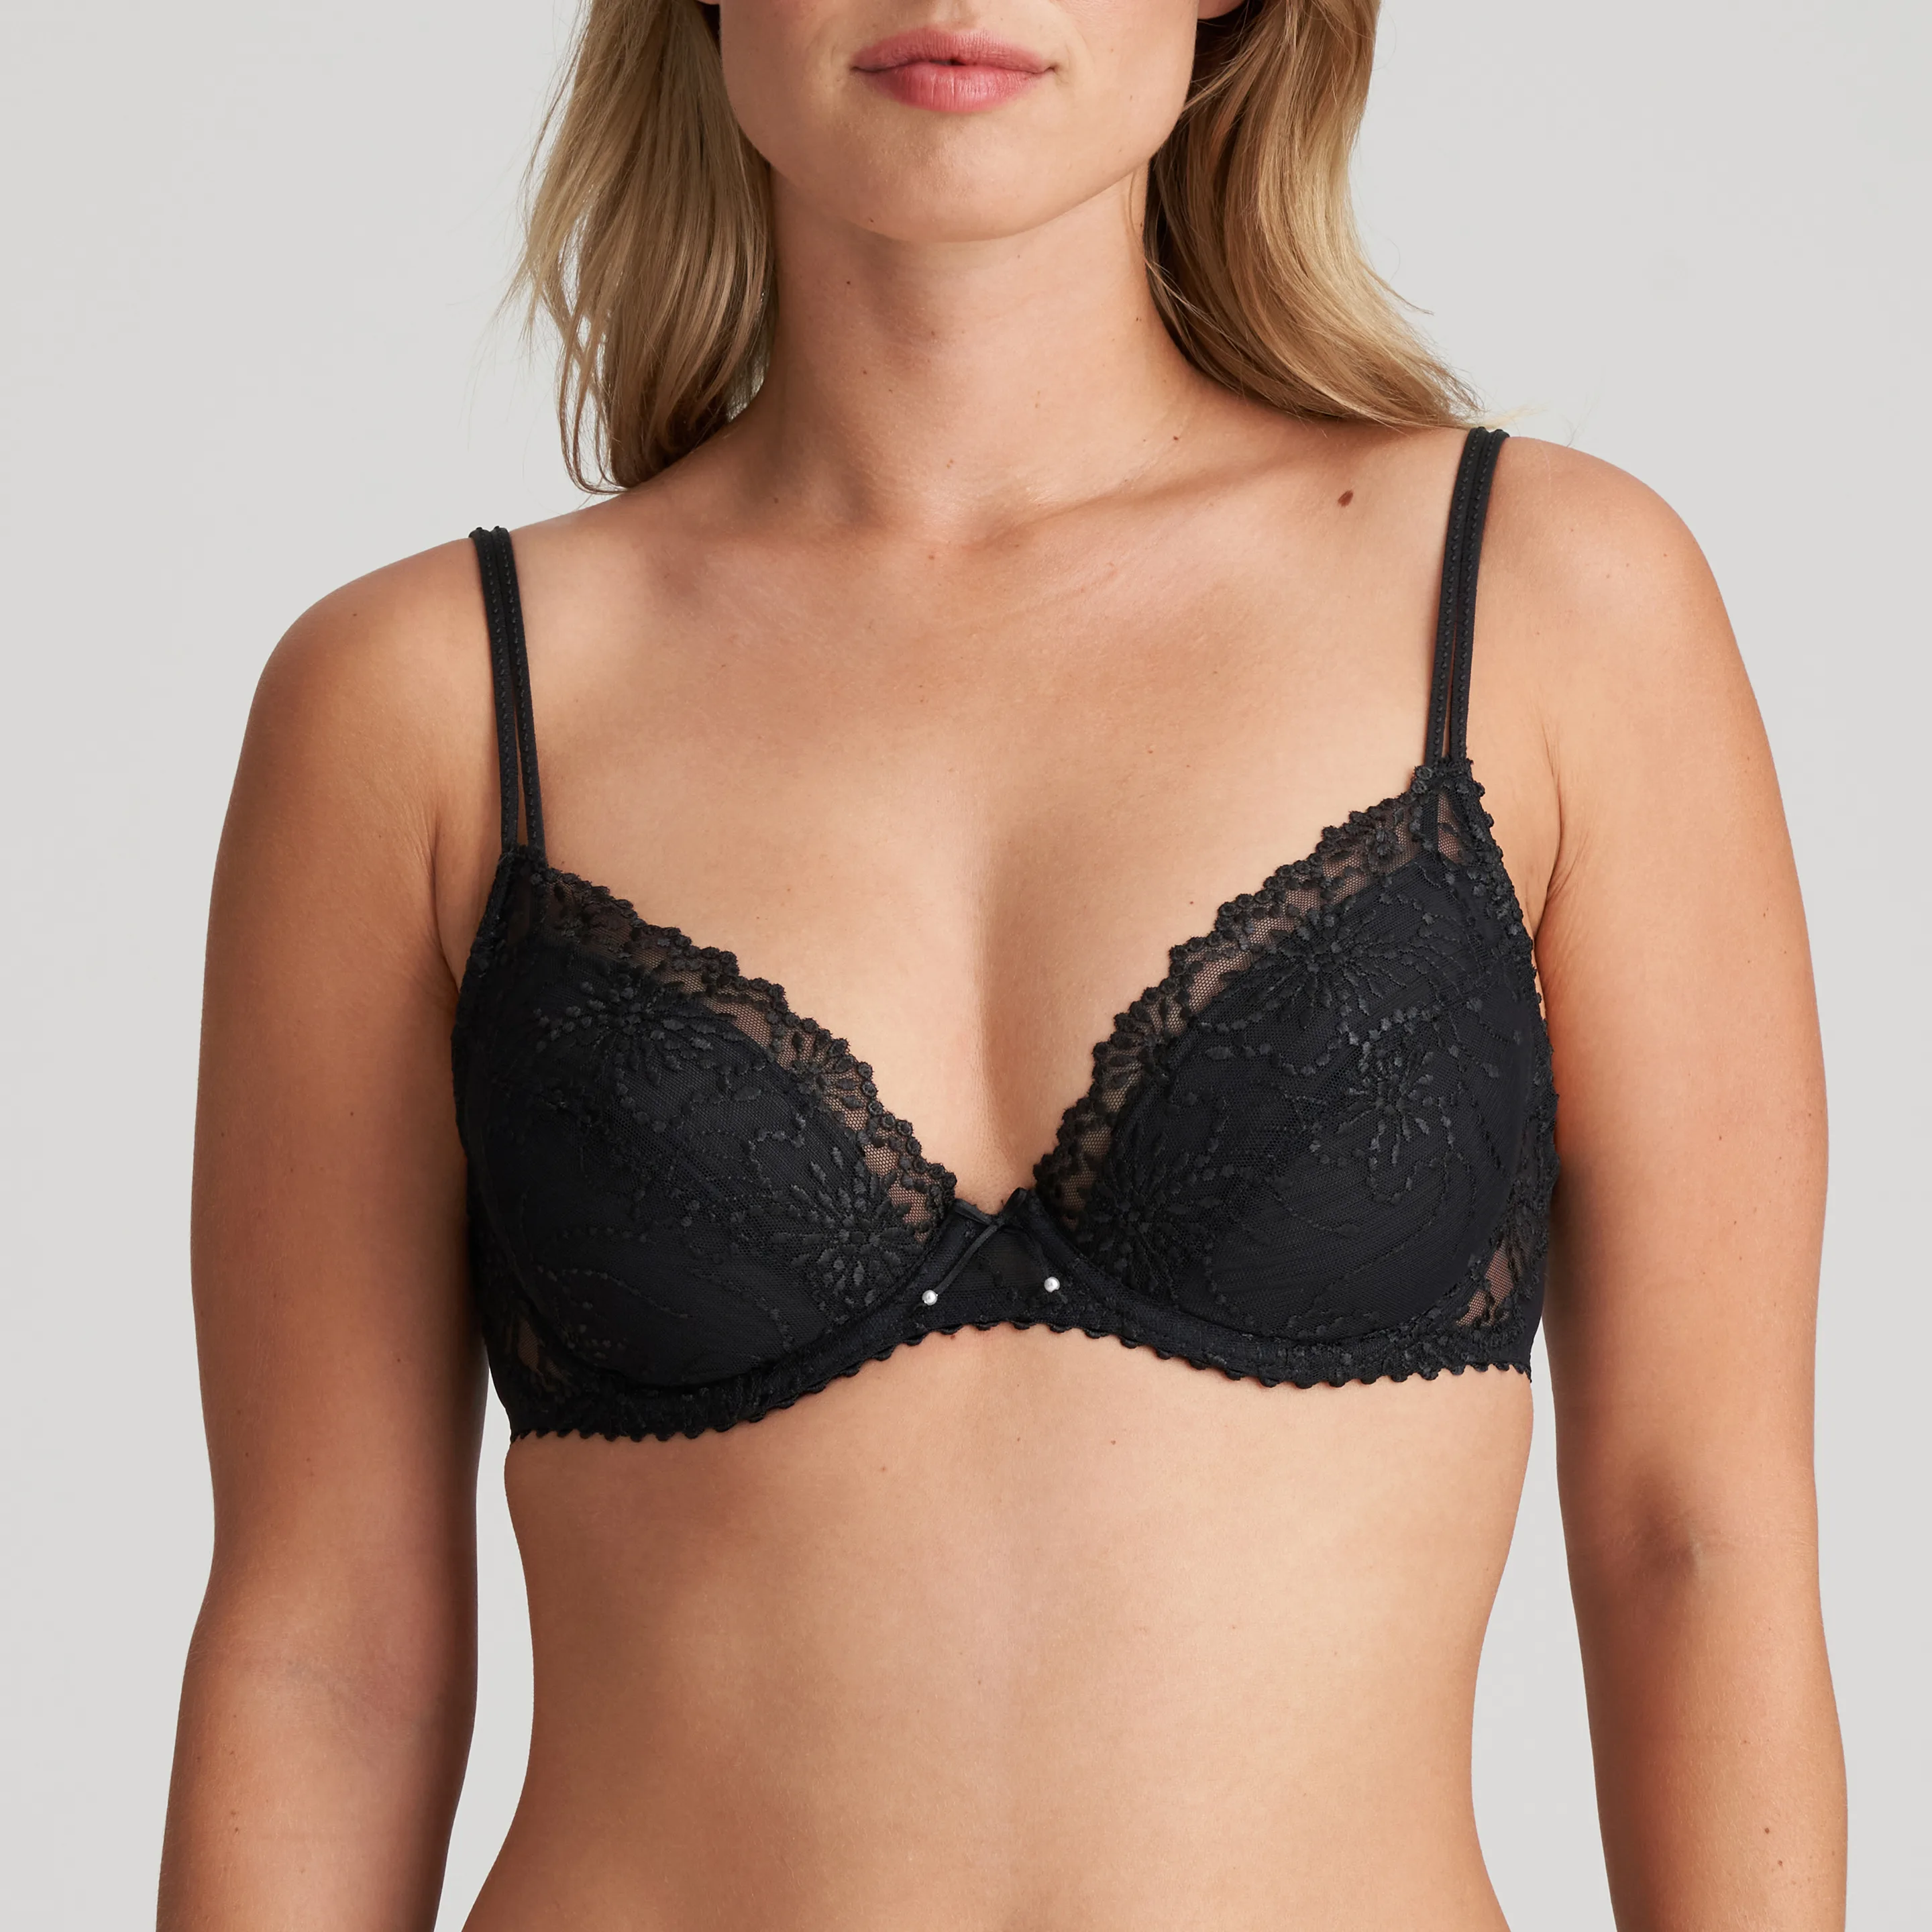 Black push-up bra with removable pads lingerie, bra